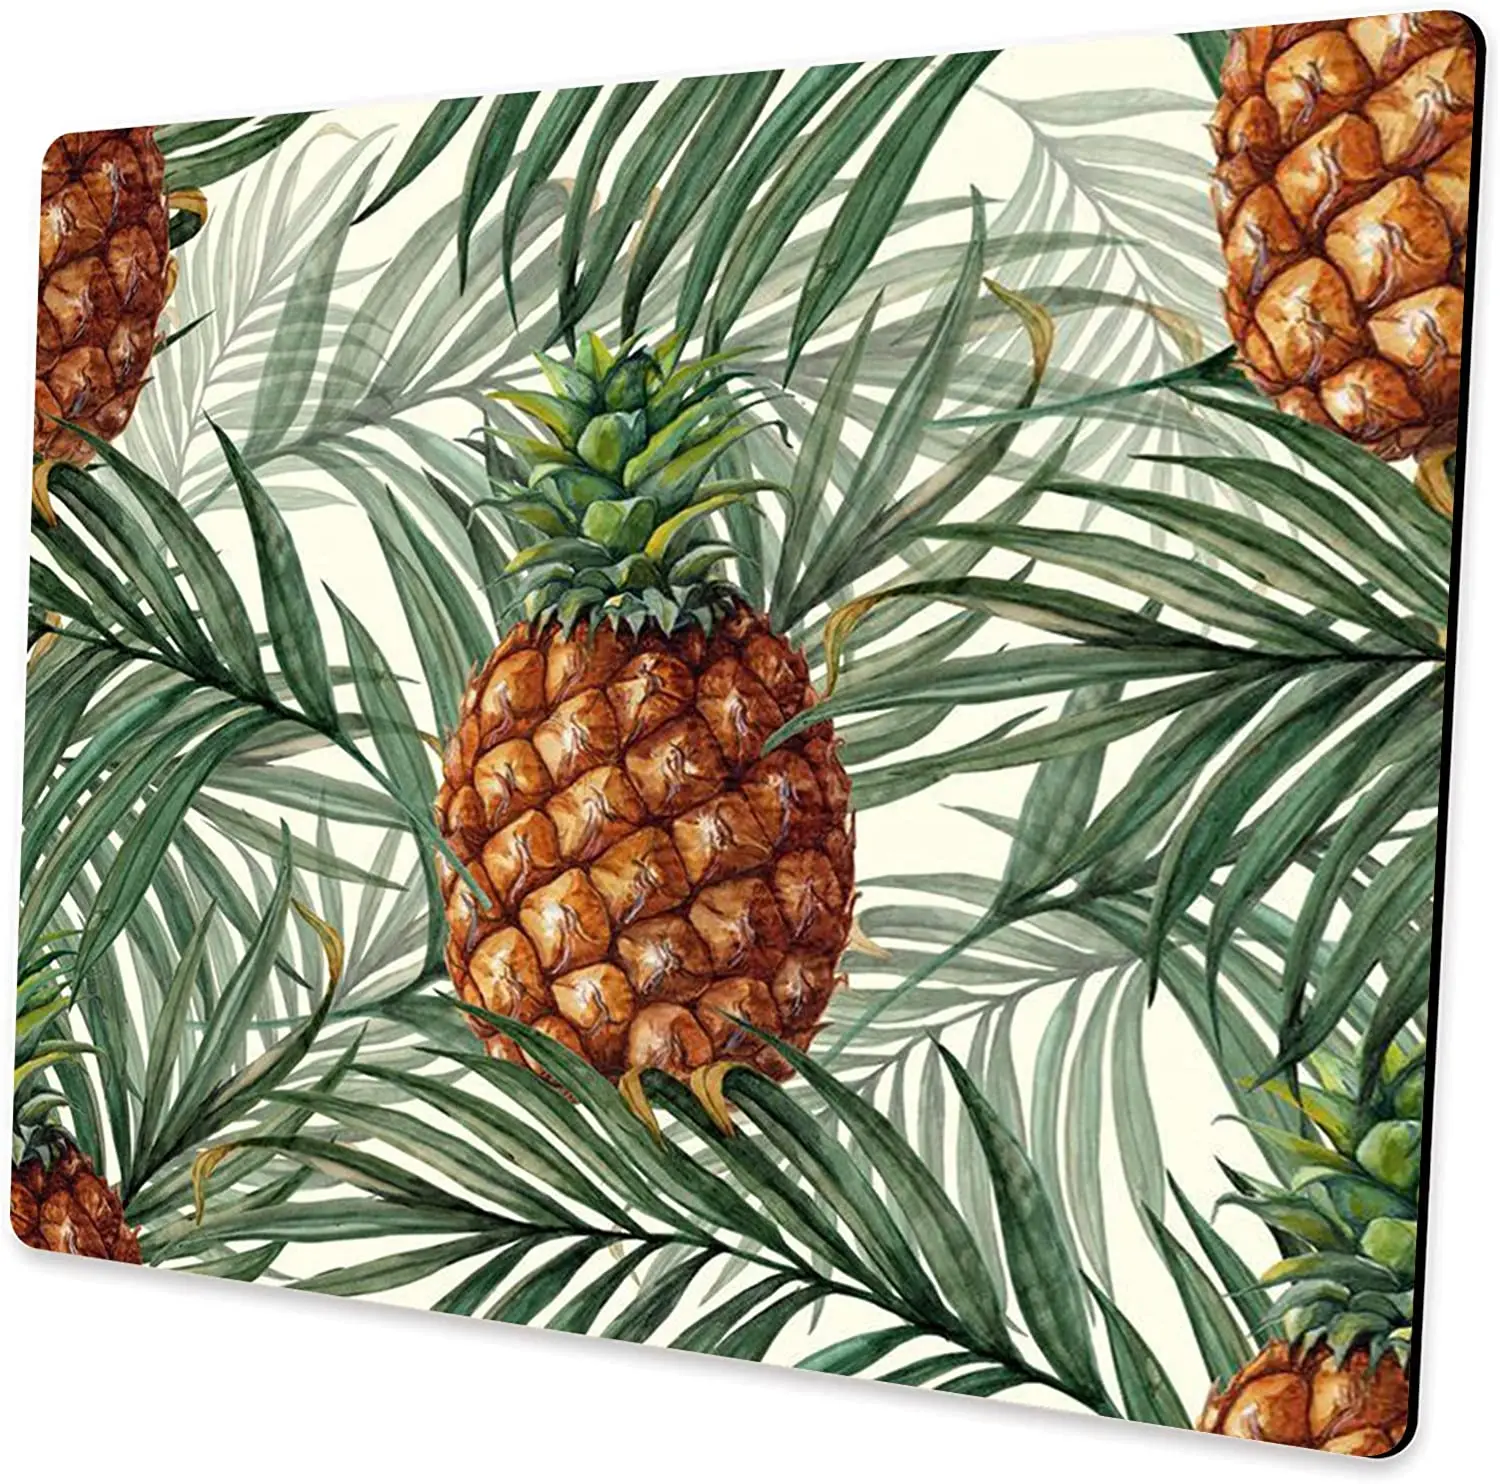 Pineapple Mouse Pad Unique Design Anti-Slip Rubber Base Mouse Pad for Desktop Computer and Laptop Mouse Pad 9.5X7.9 Inch